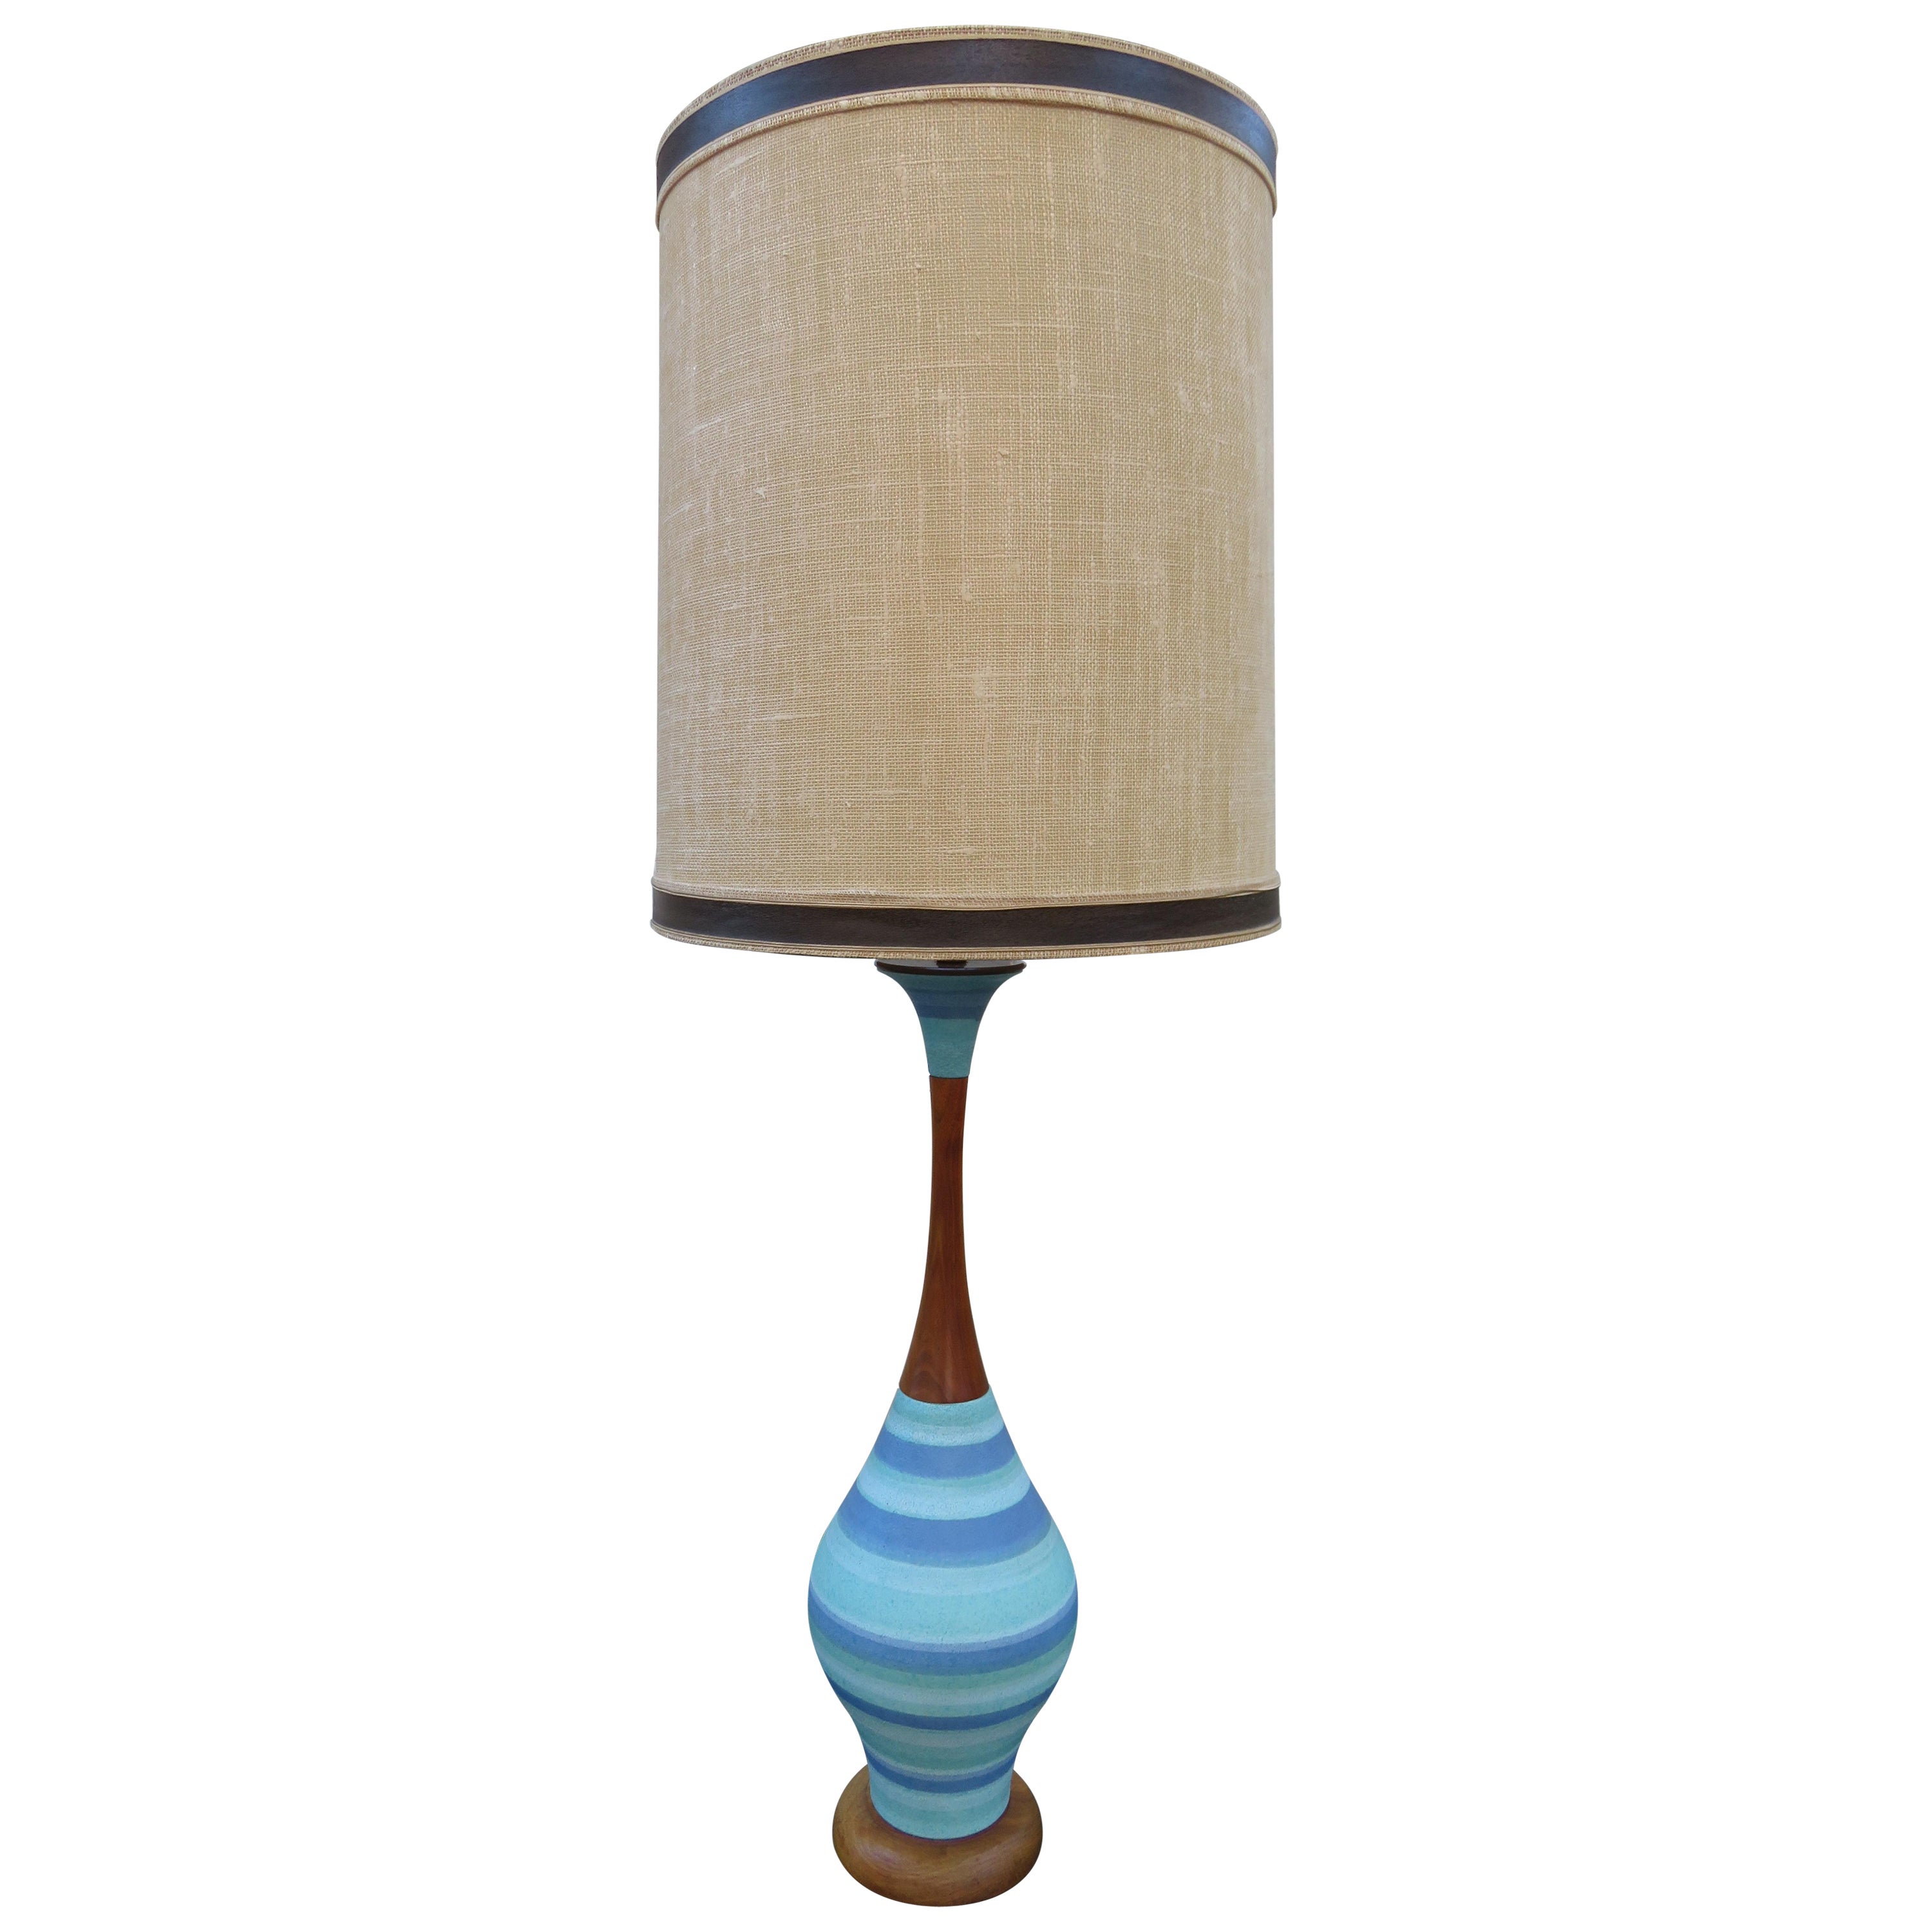 Fabulous Tall Striped Turquoise Blue Ceramic Lamp Walnut Mid-Century Modern For Sale